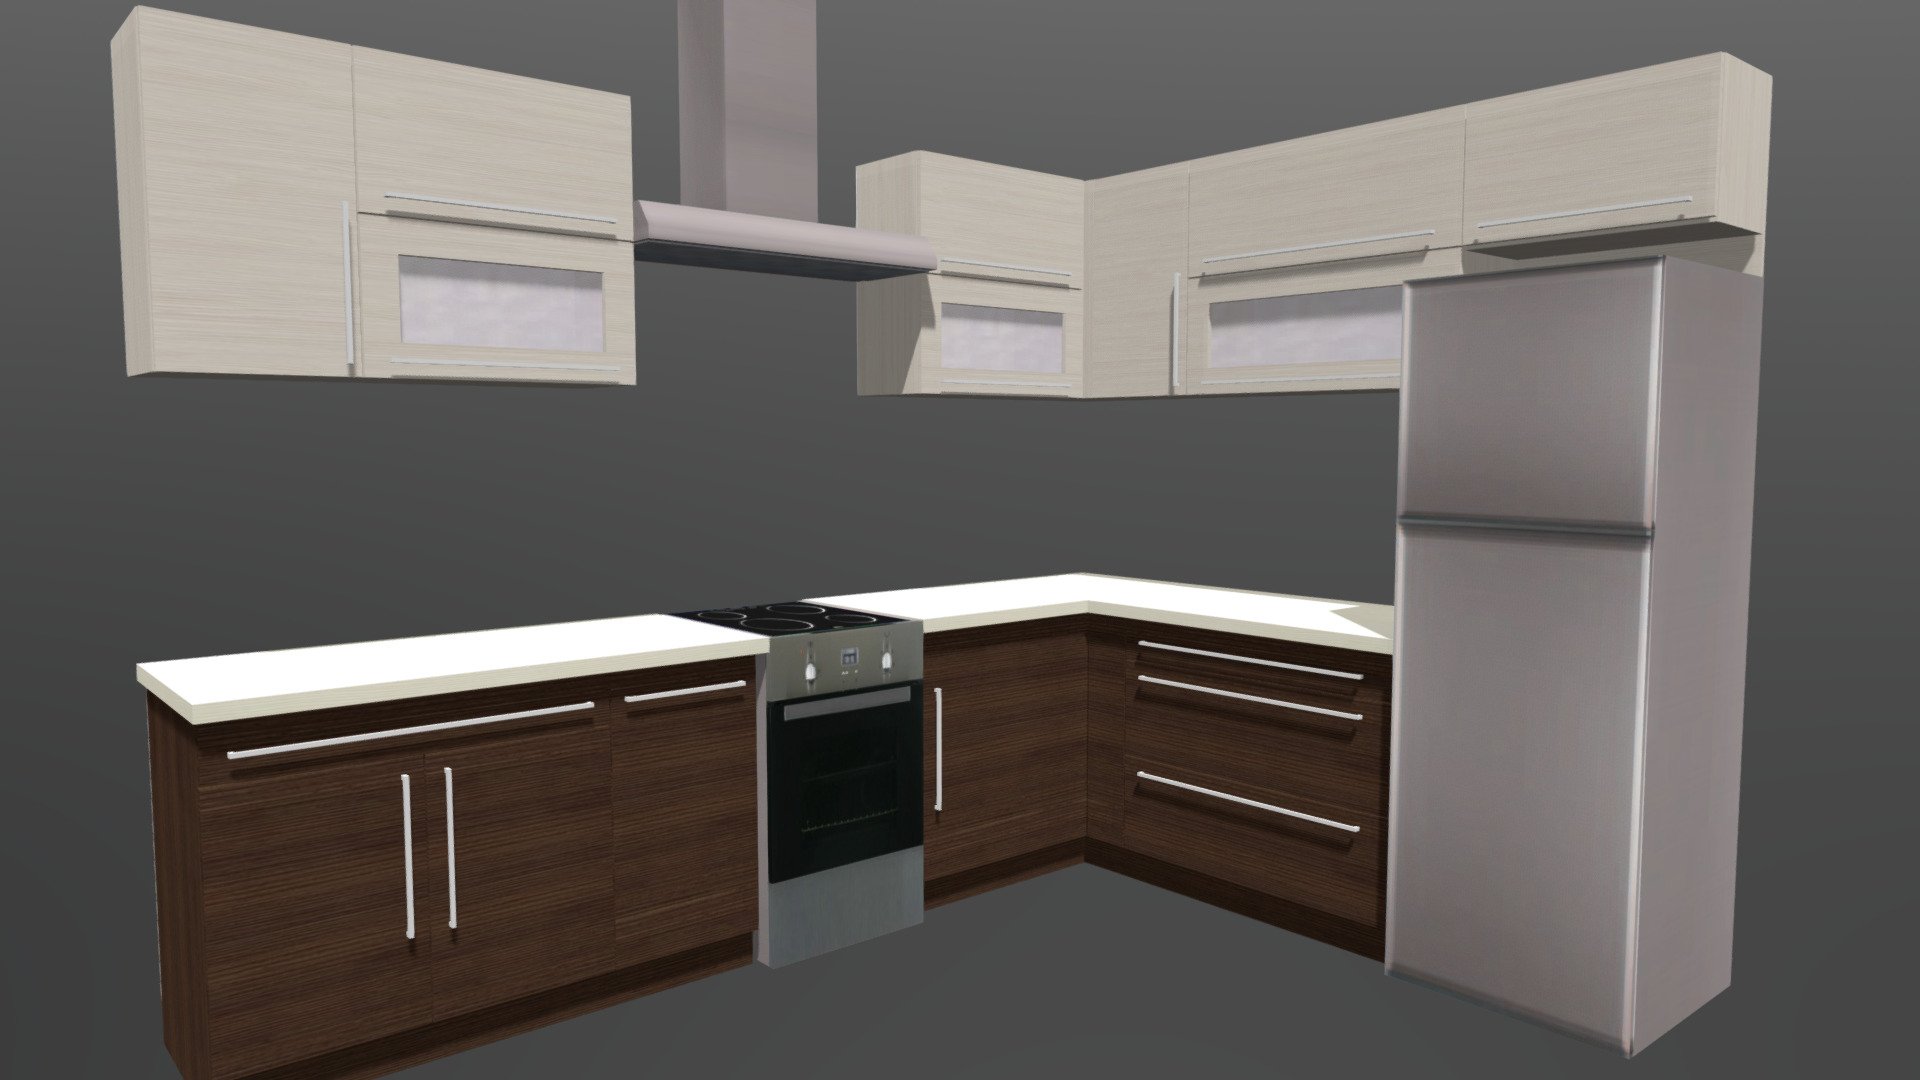 Kitchen cabinet created by free cabinet deisgn software.
The modell can also be downloaded in its original file format.
It also contains the parts list and assembly drawings.
Based on these, the furniture can be built in reality.
The cad software can be downloaded here: http://www.freecabinetcad.com

Az ms_Bútortervező ingyenes programmal készített konyhabútor.
A rajz elérhető az eredeti fájlformátumban is.
A tervező szoftver innen letölthető : http://www.butortervezo.com

W:2250 mm
L:3030 mm
H:2220 mm - Kitchen cabinet 3 - Buy Royalty Free 3D model by ms_Butor (@butortervezo) 3d model